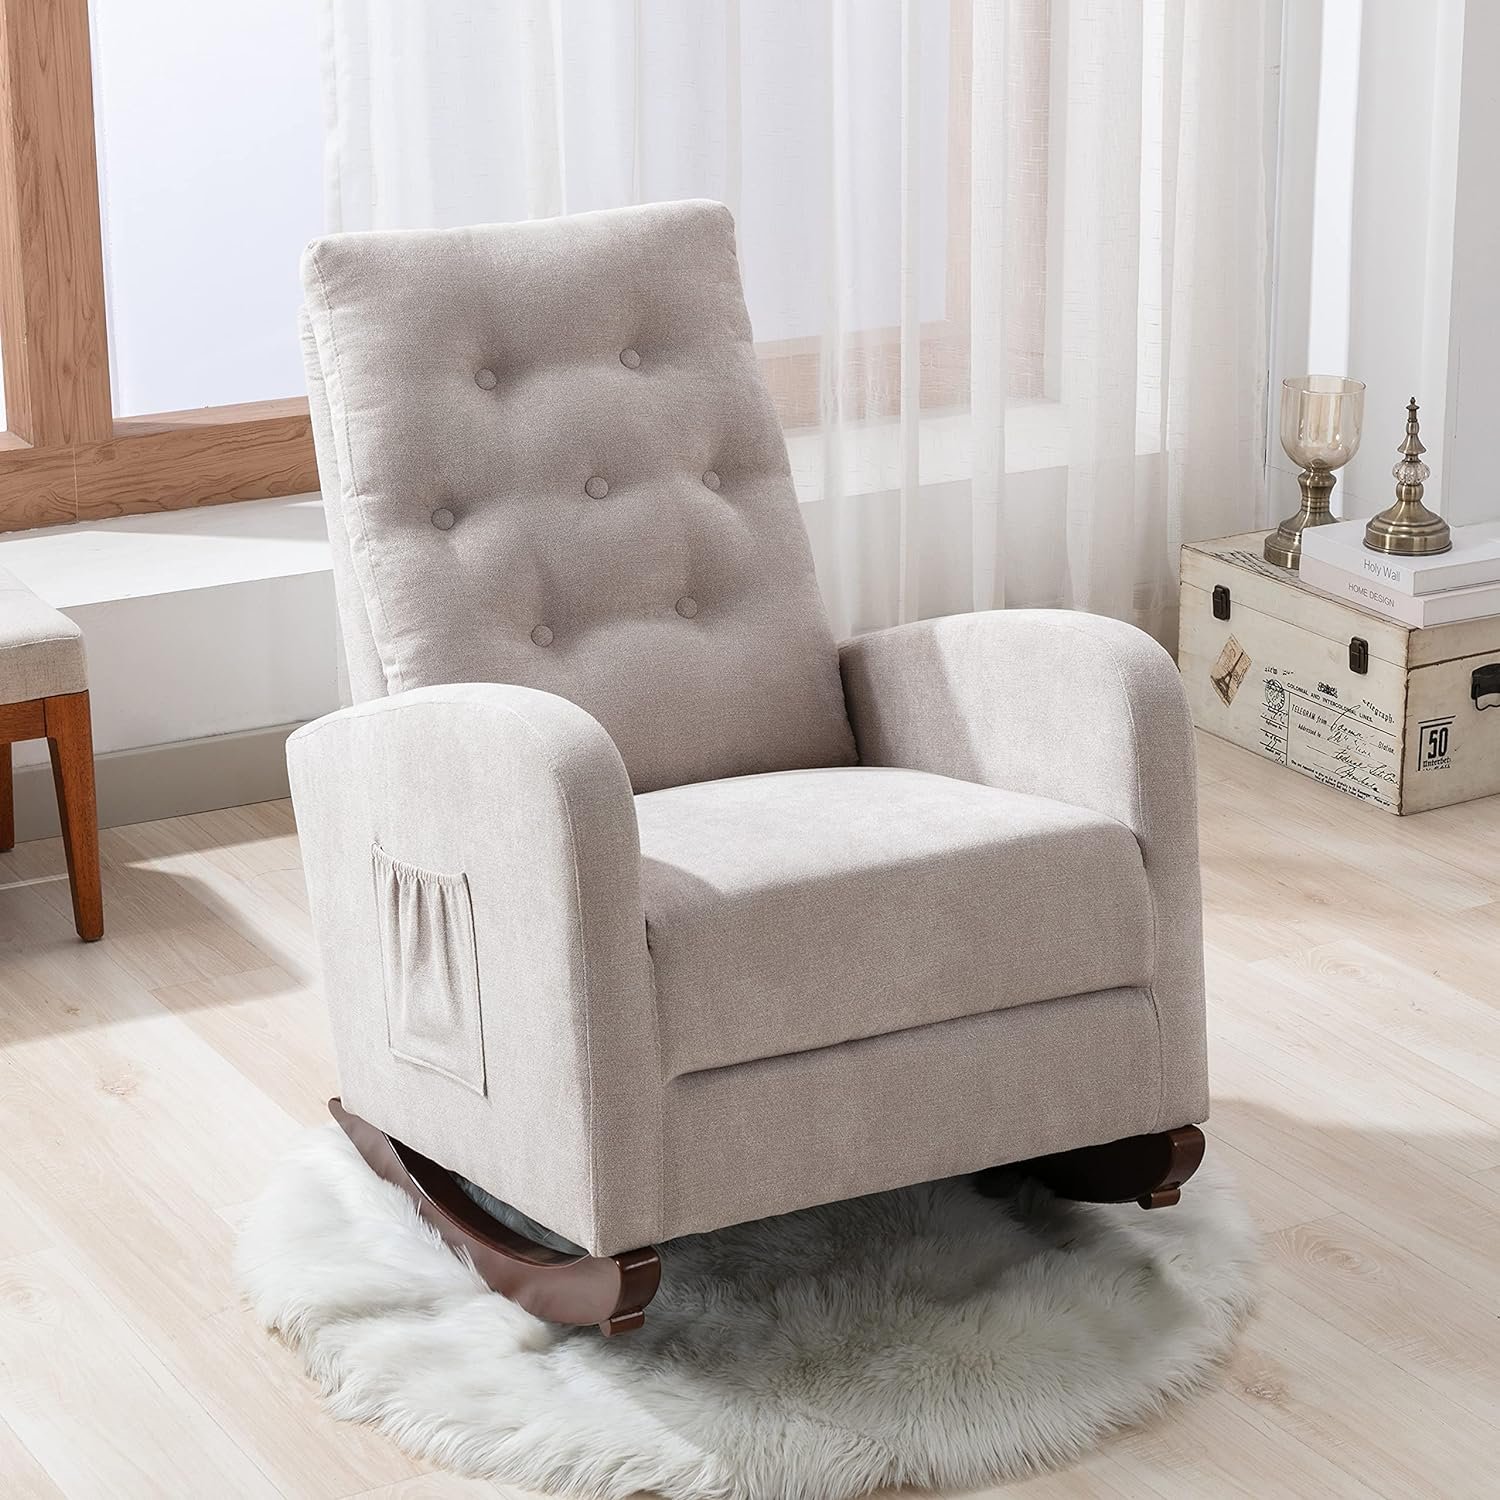 Morhome Tufted Rocking Chair Review